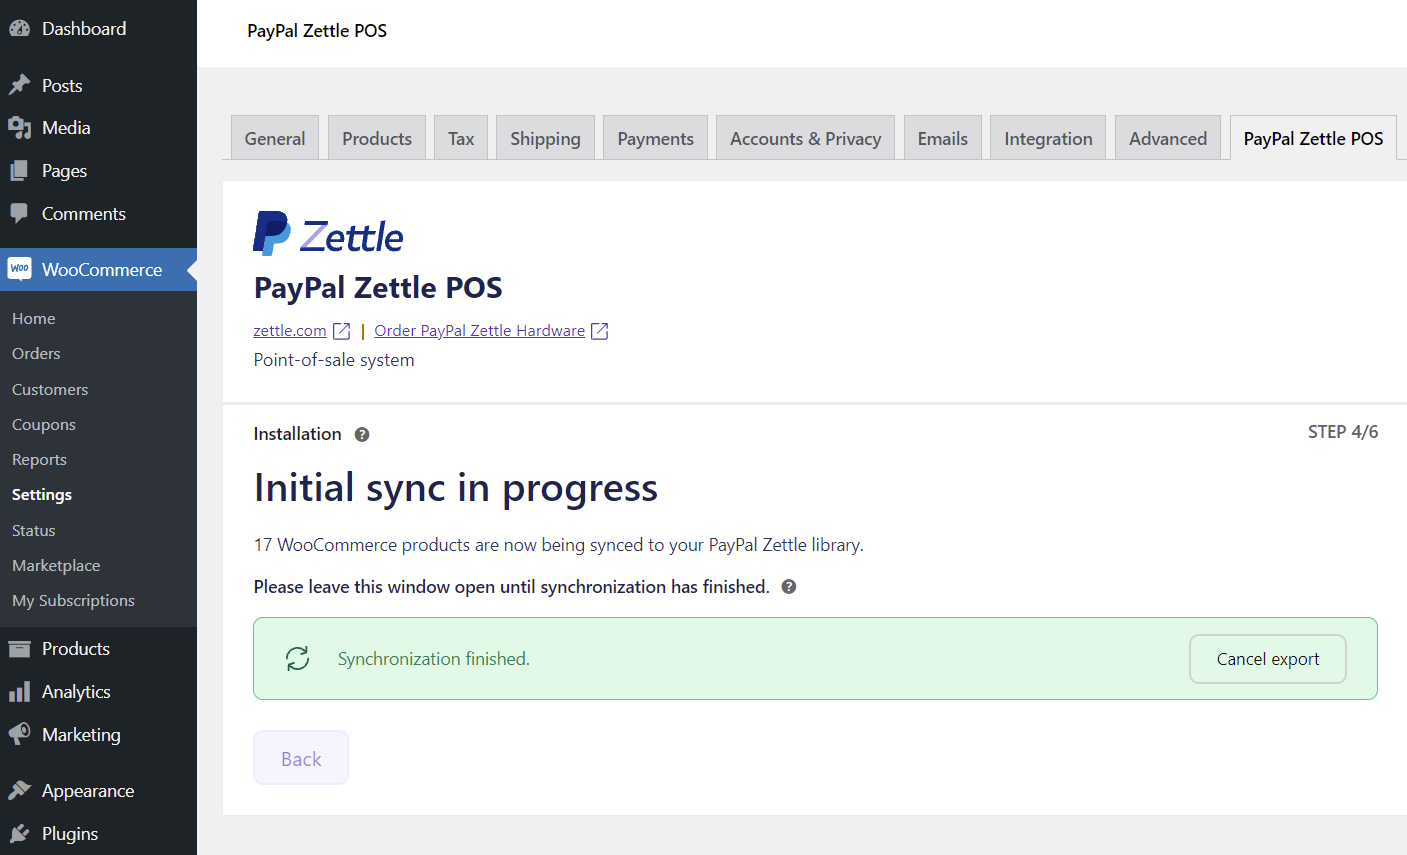 PayPal Zettle POS installation STEP 4